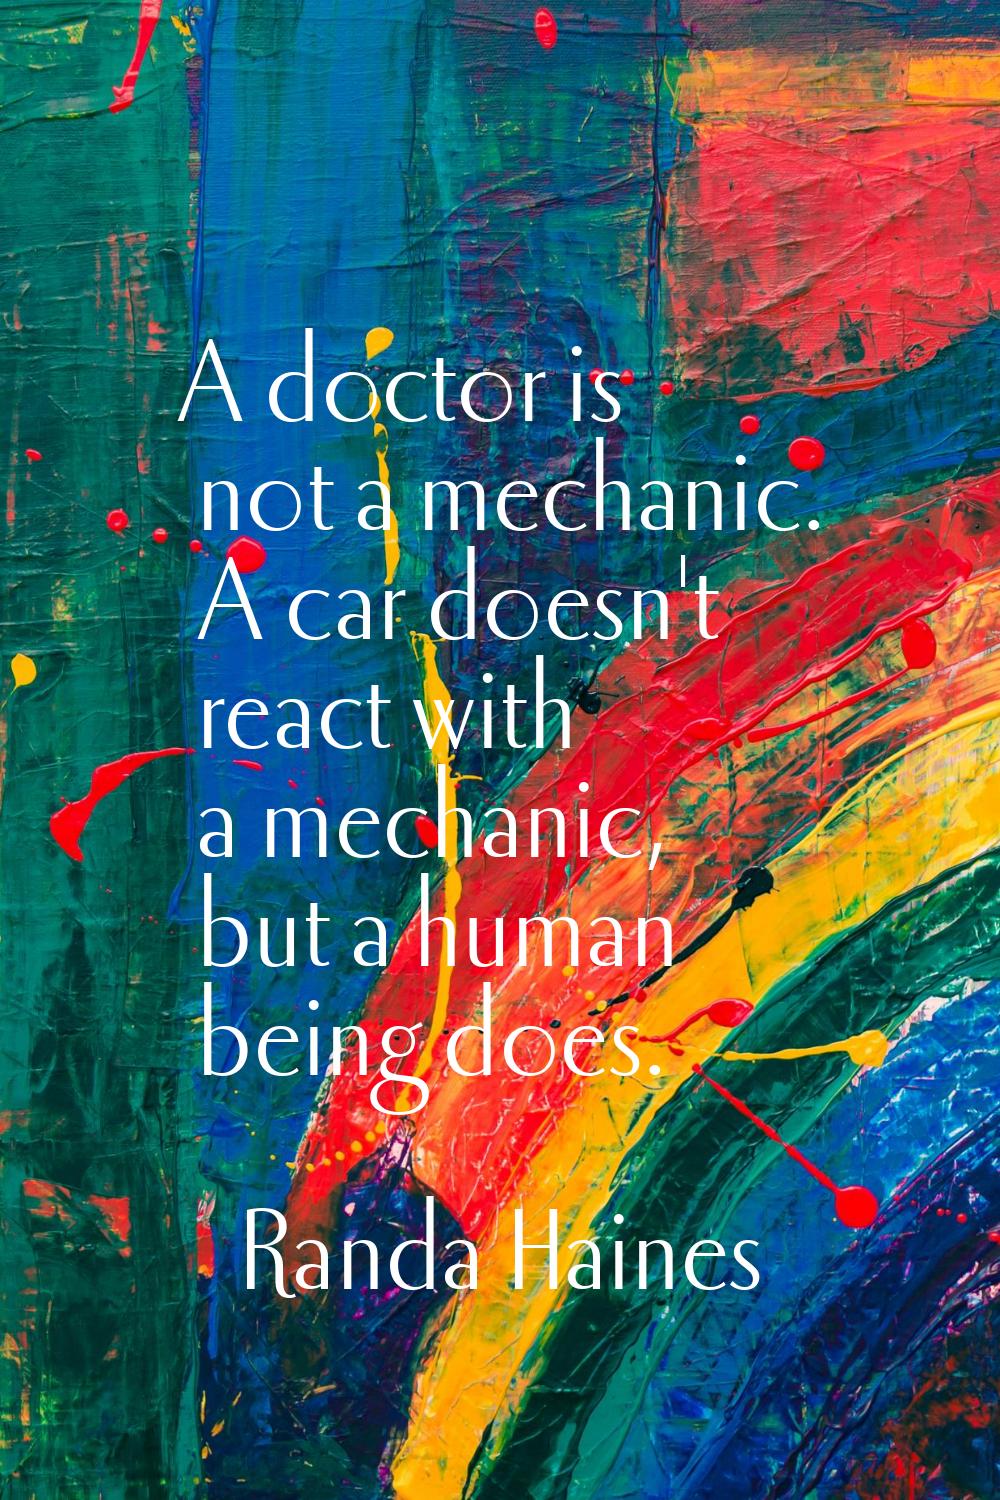 A doctor is not a mechanic. A car doesn't react with a mechanic, but a human being does.